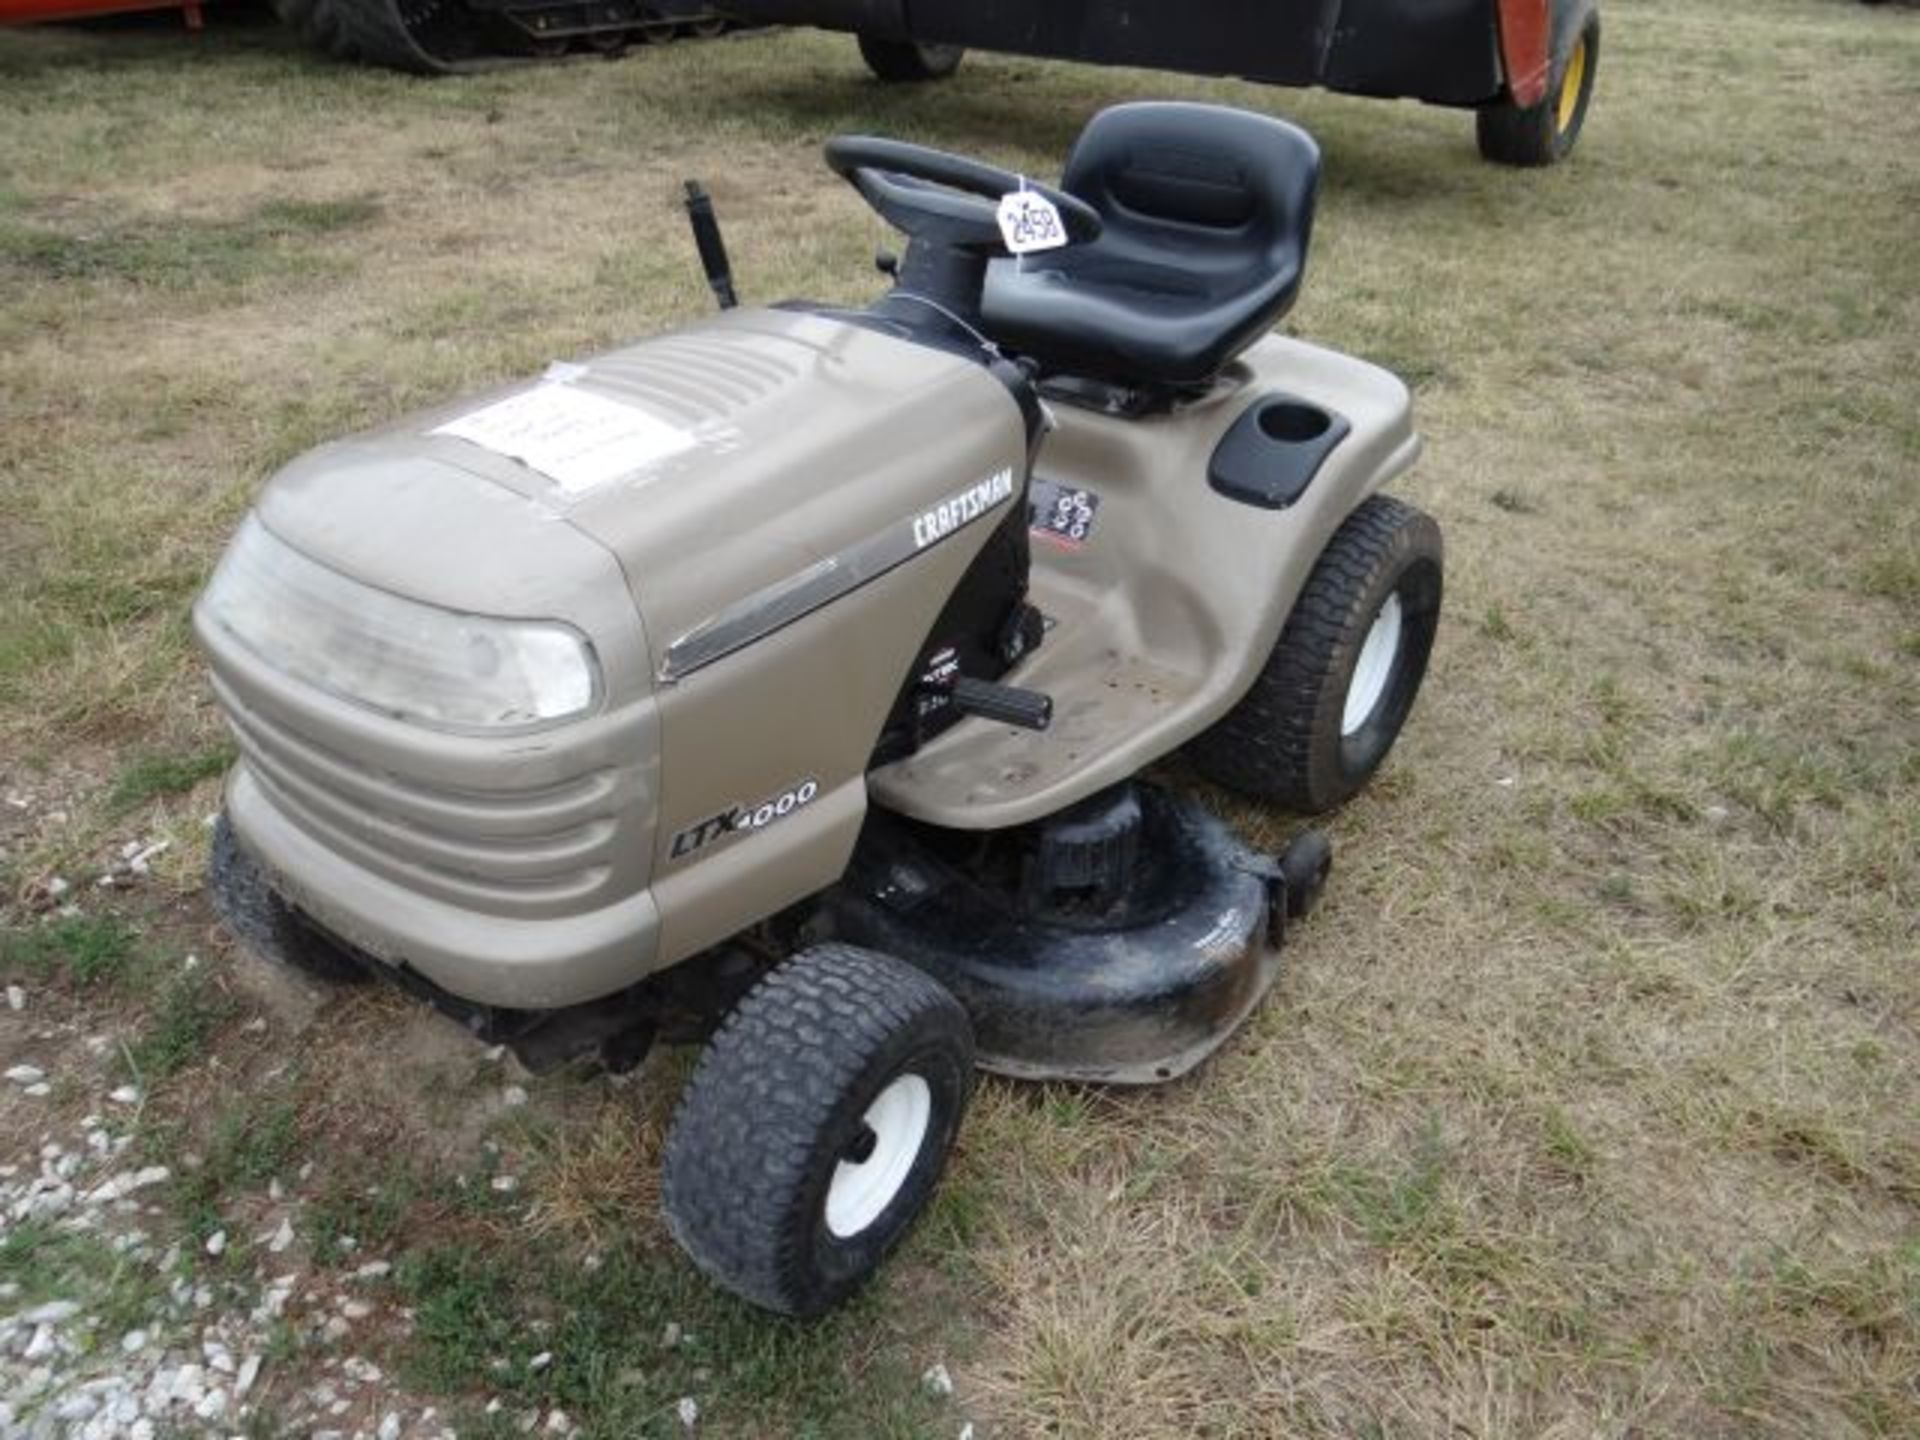 Sears Riding Mower 42" Deck, New Battery, Manual in the Shed